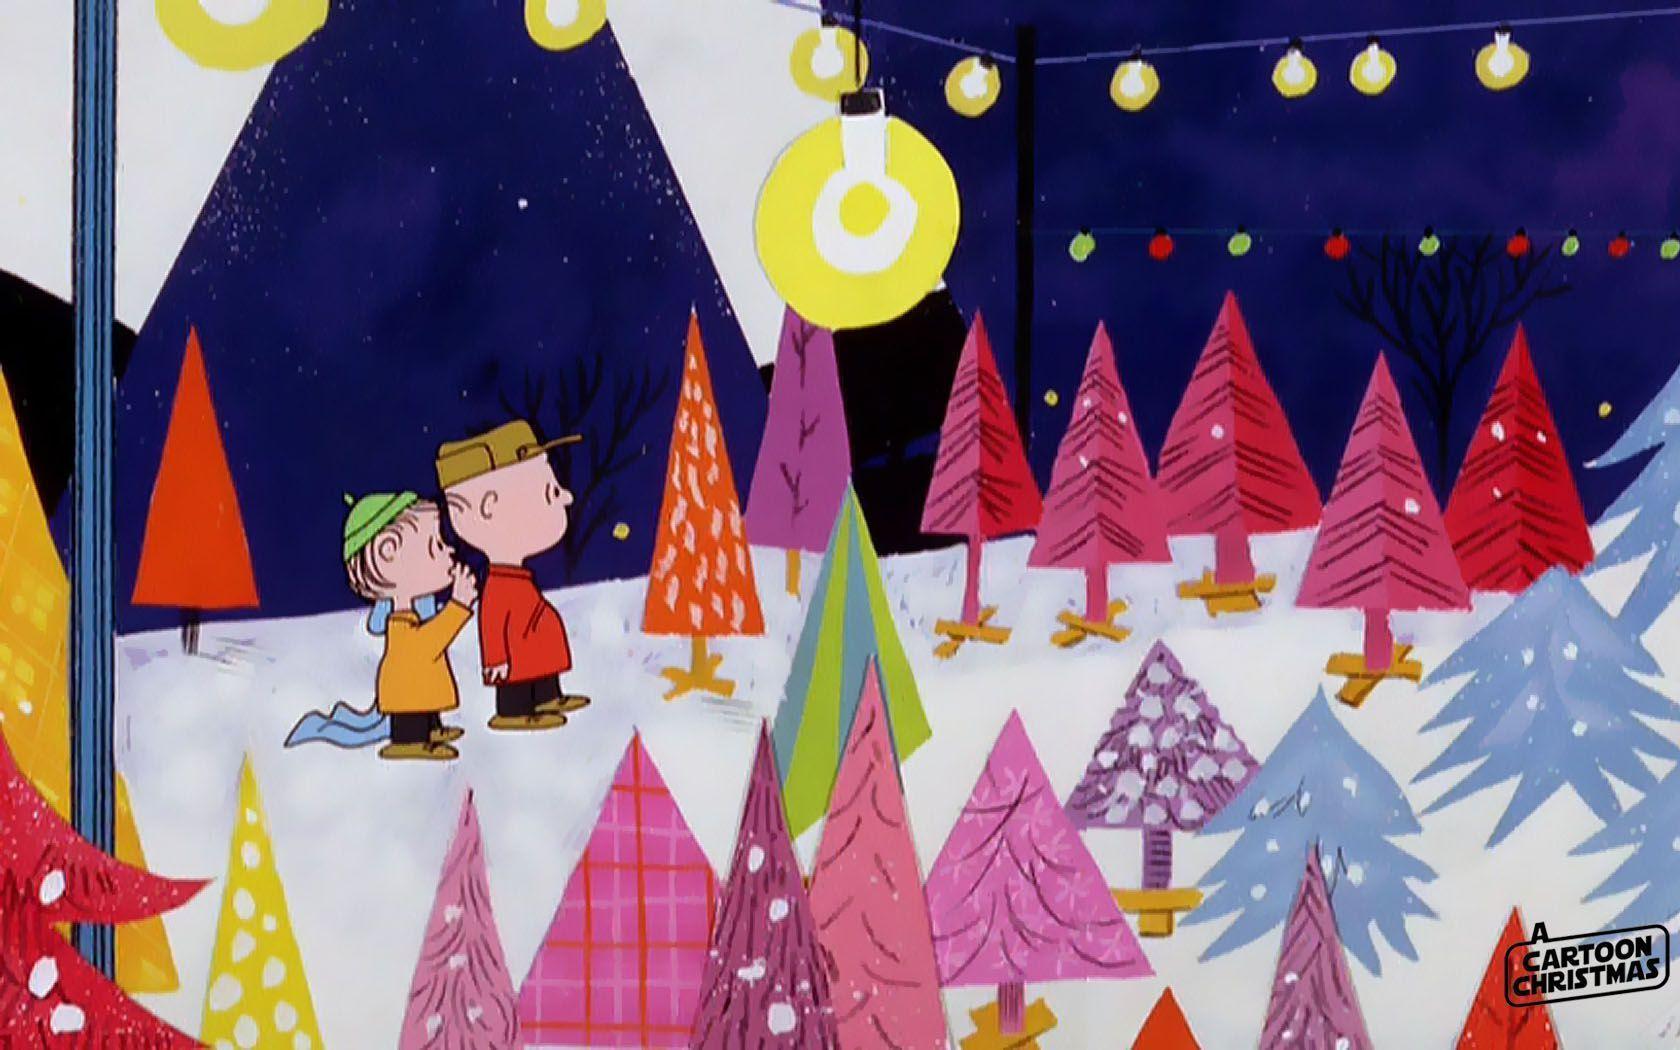 Get your Charlie Brown Chrismas Wallpapers right here!